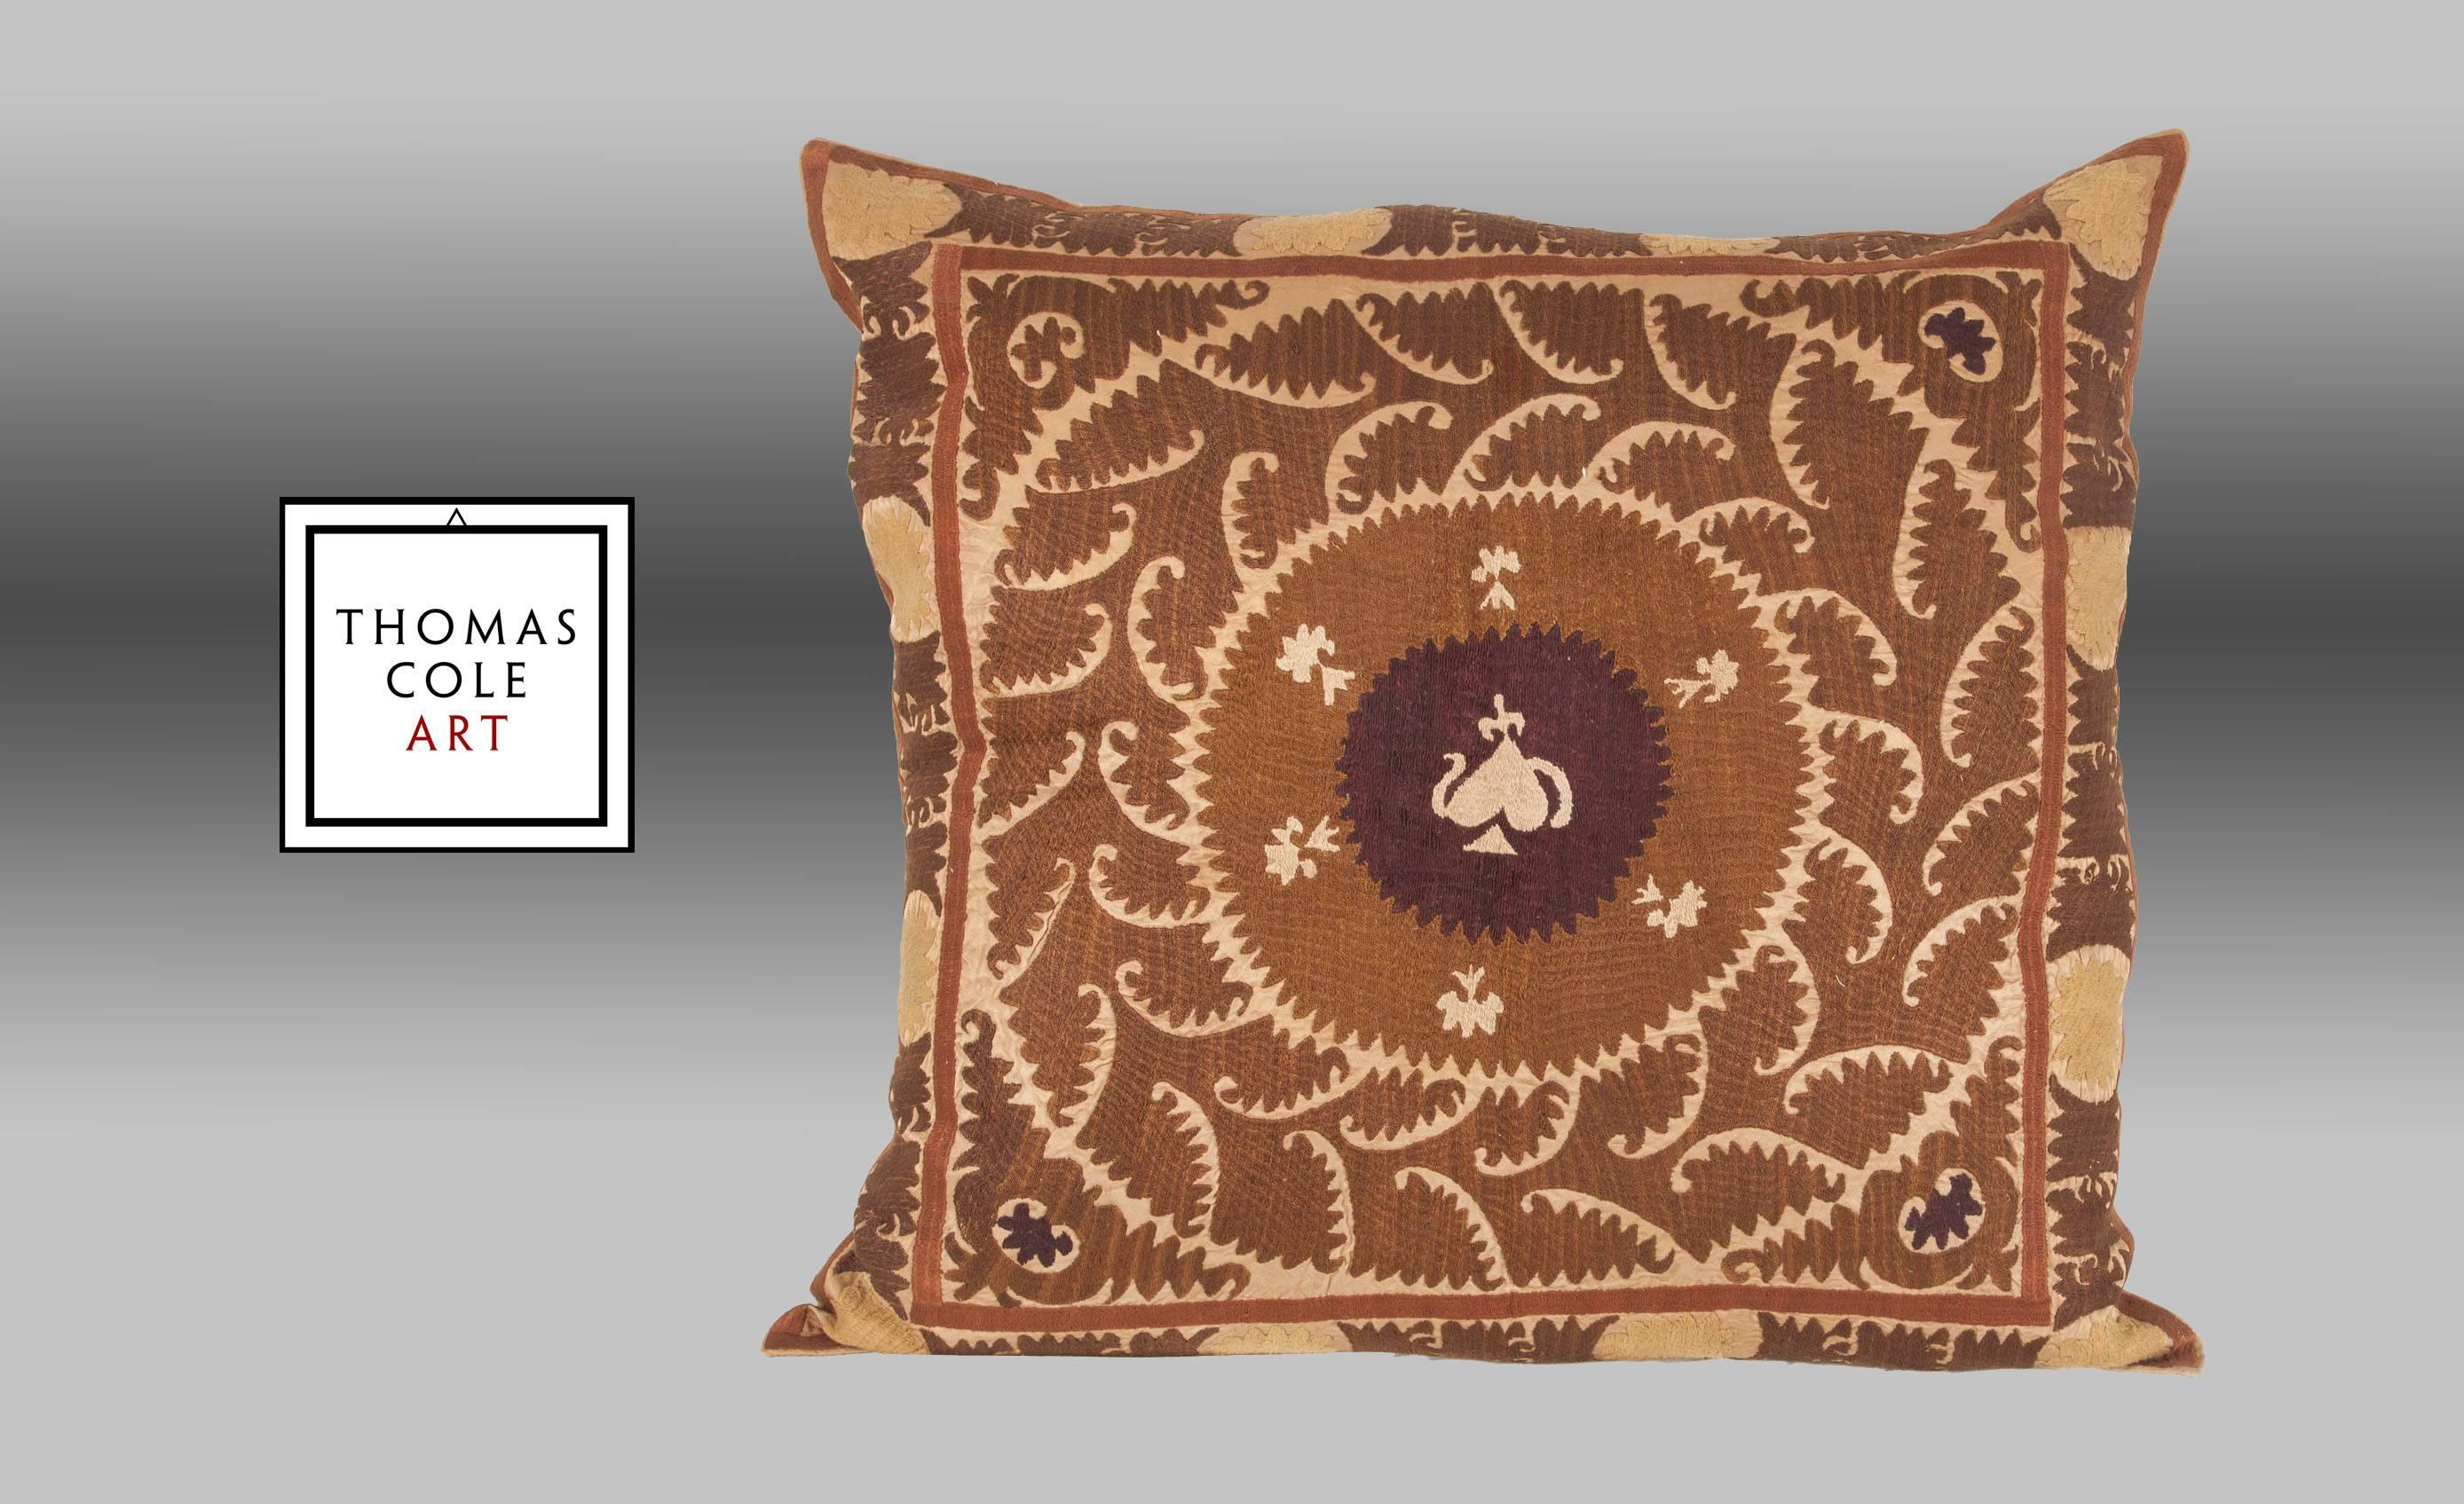 A pillow fashioned from a vintage Uzbek embroidery from the Samarkand area of that region. The pillow is backed with a linen cloth (see final detail image).

The condition is good, with no holes, repair or stains. Measures: 34.6